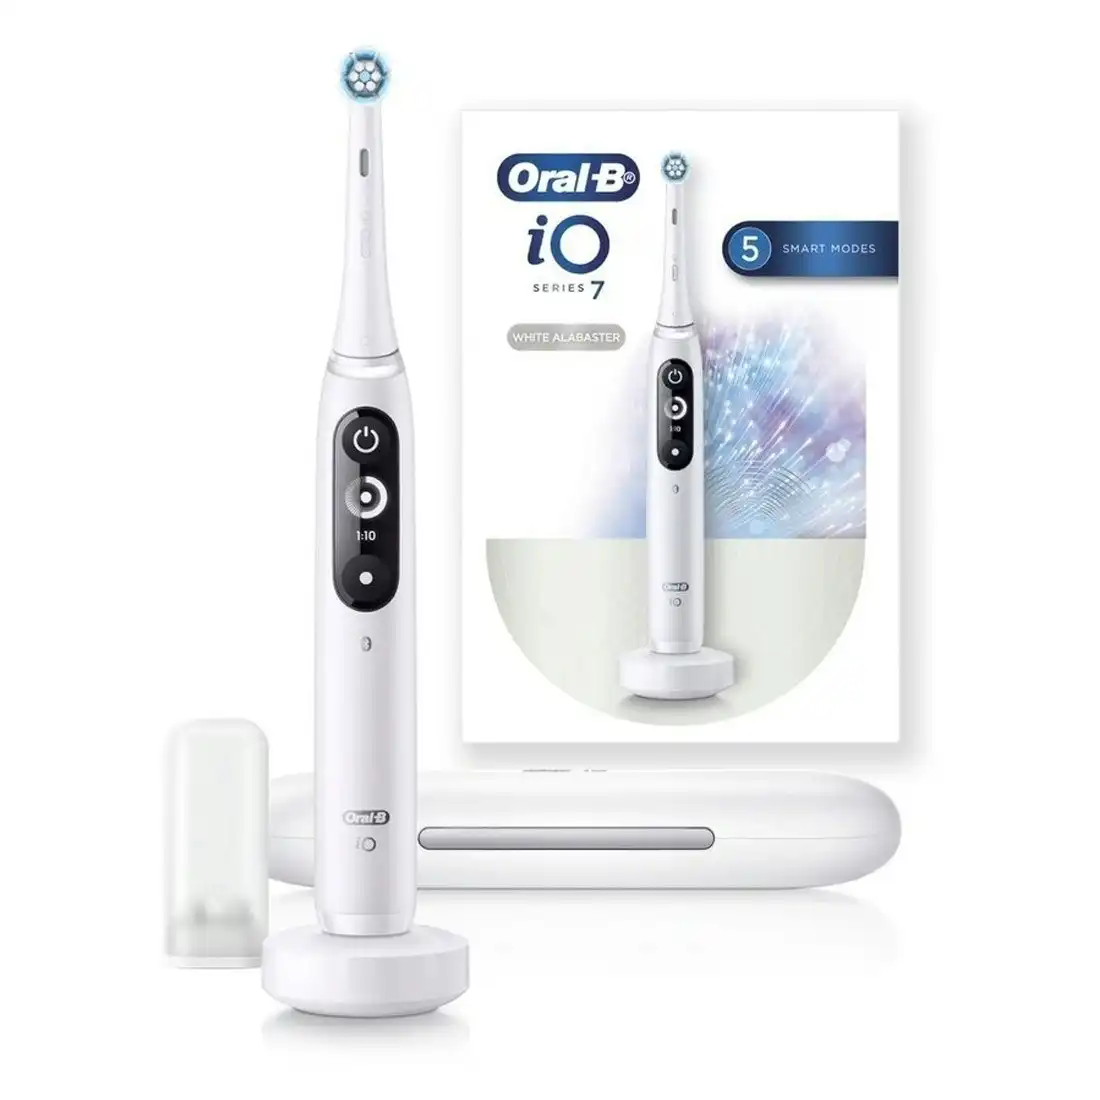 Oral-B iO 7 Series Rechargeable Toothbrush with Travel Case - White